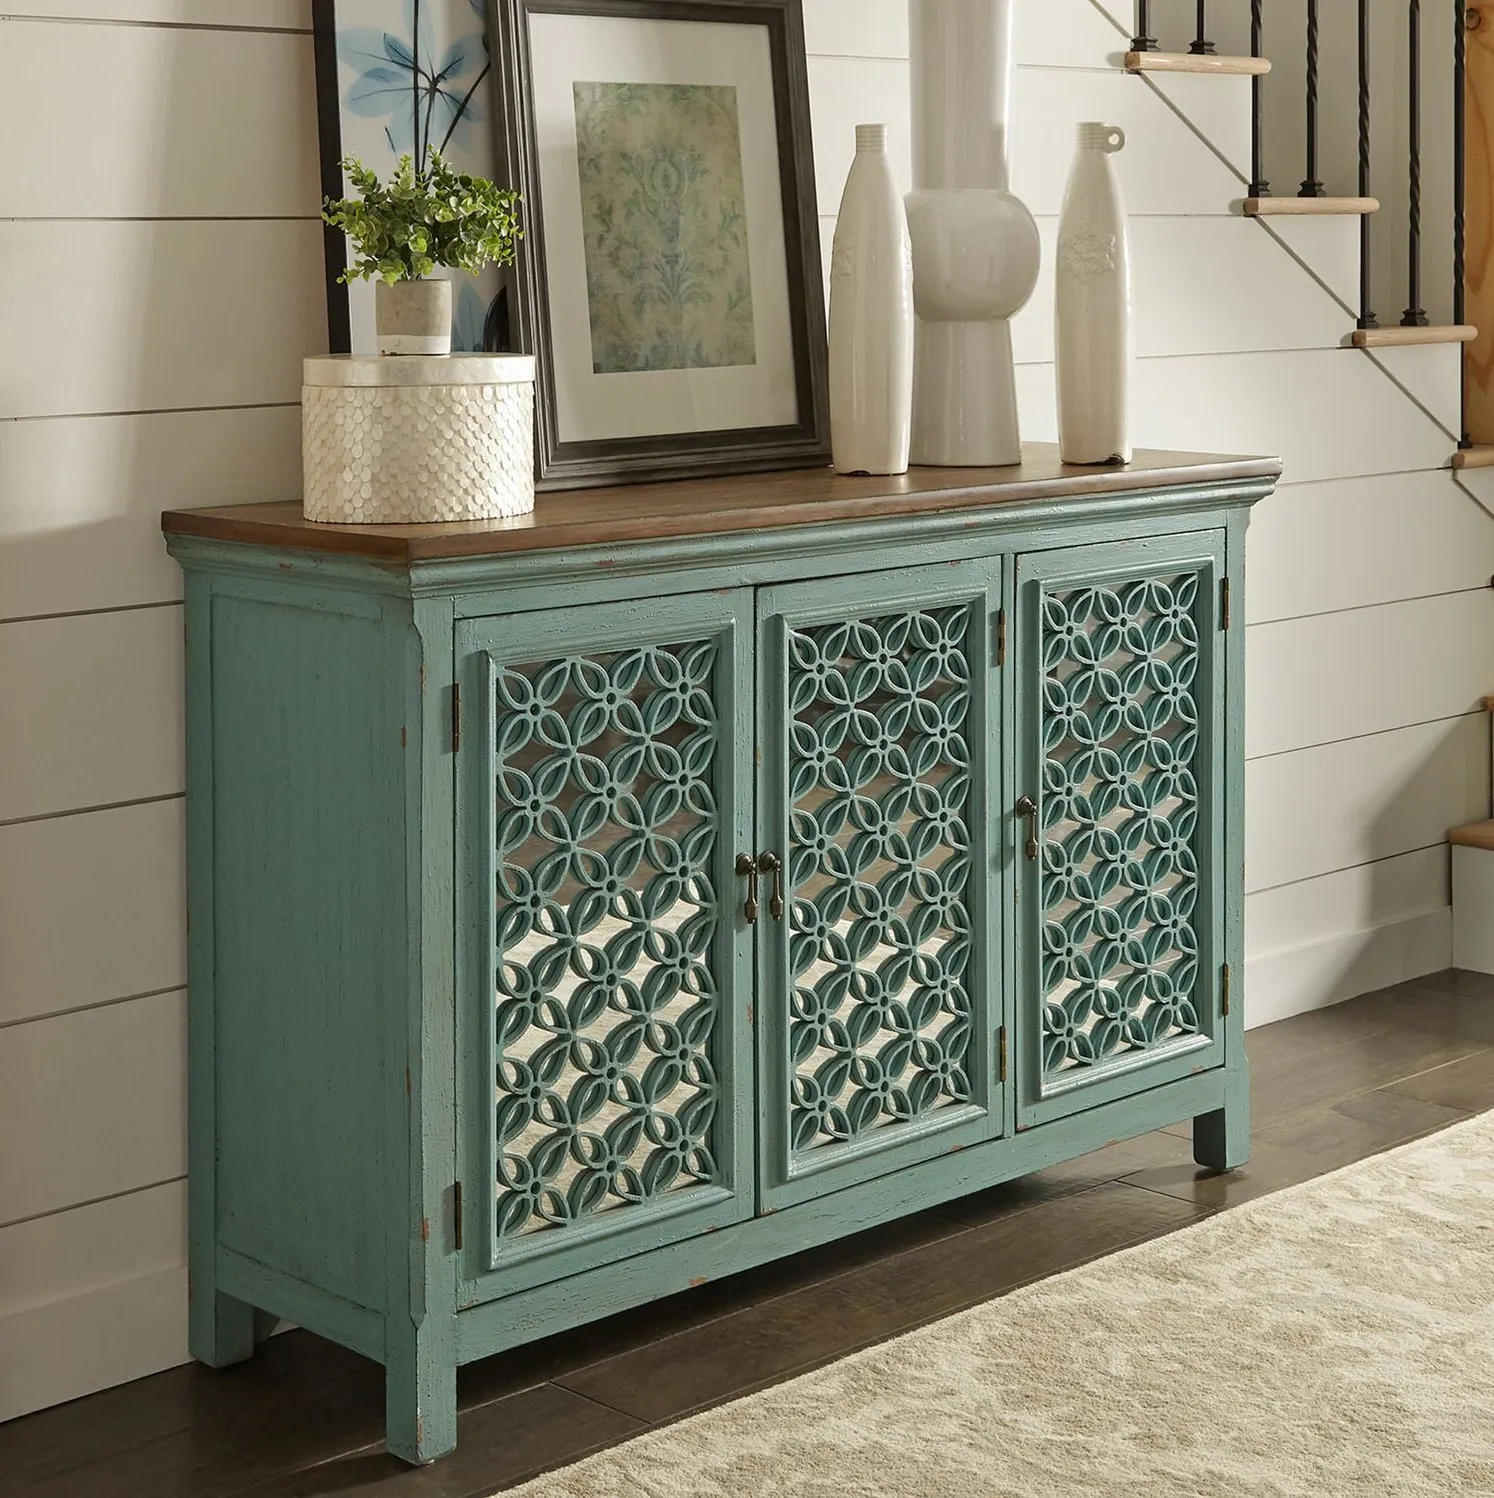 Eclectic Collection Turquoise 3 Door Cabinet